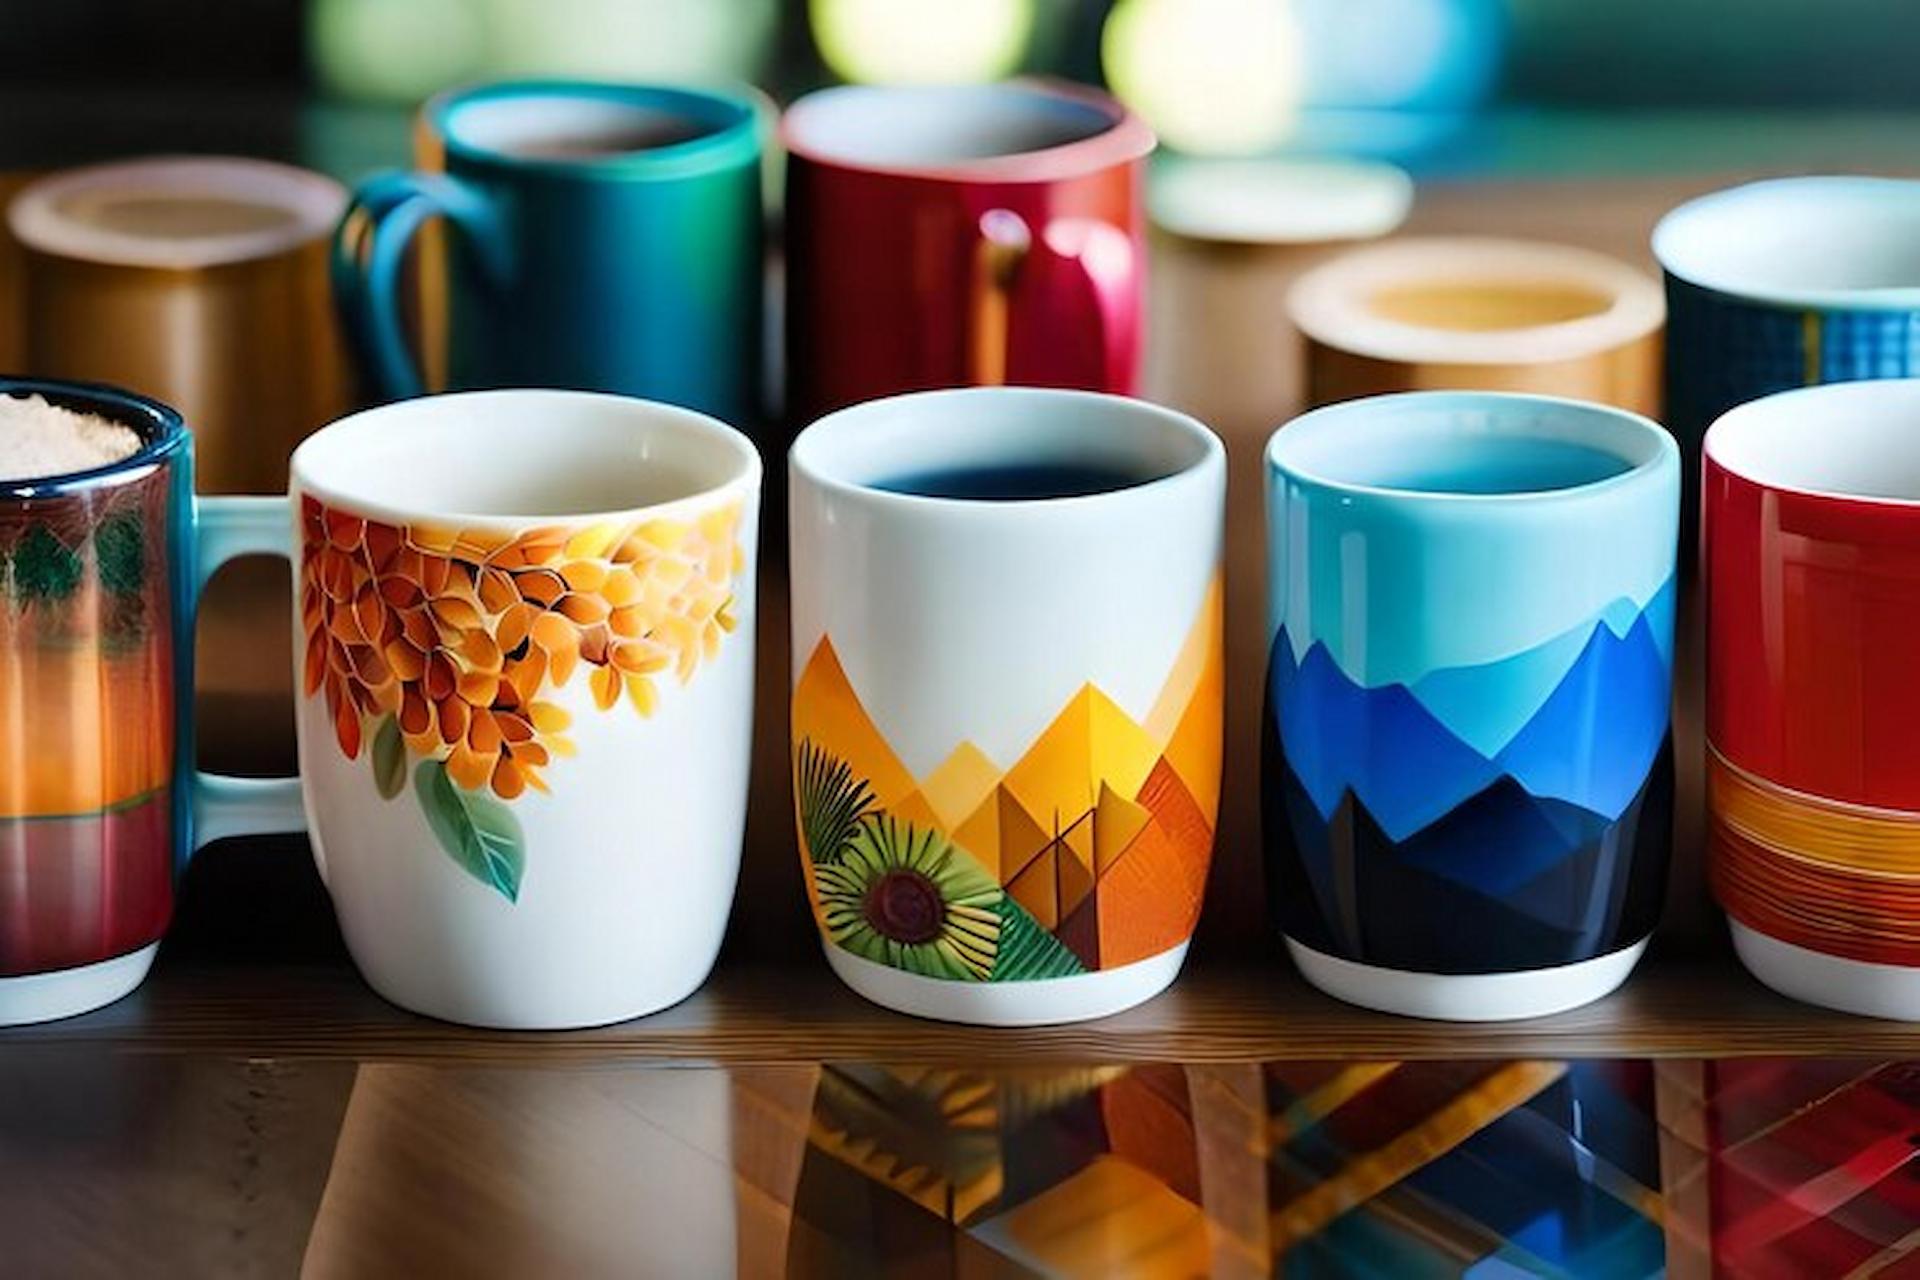 Creative Designs For Unique Mugs That Stand Out